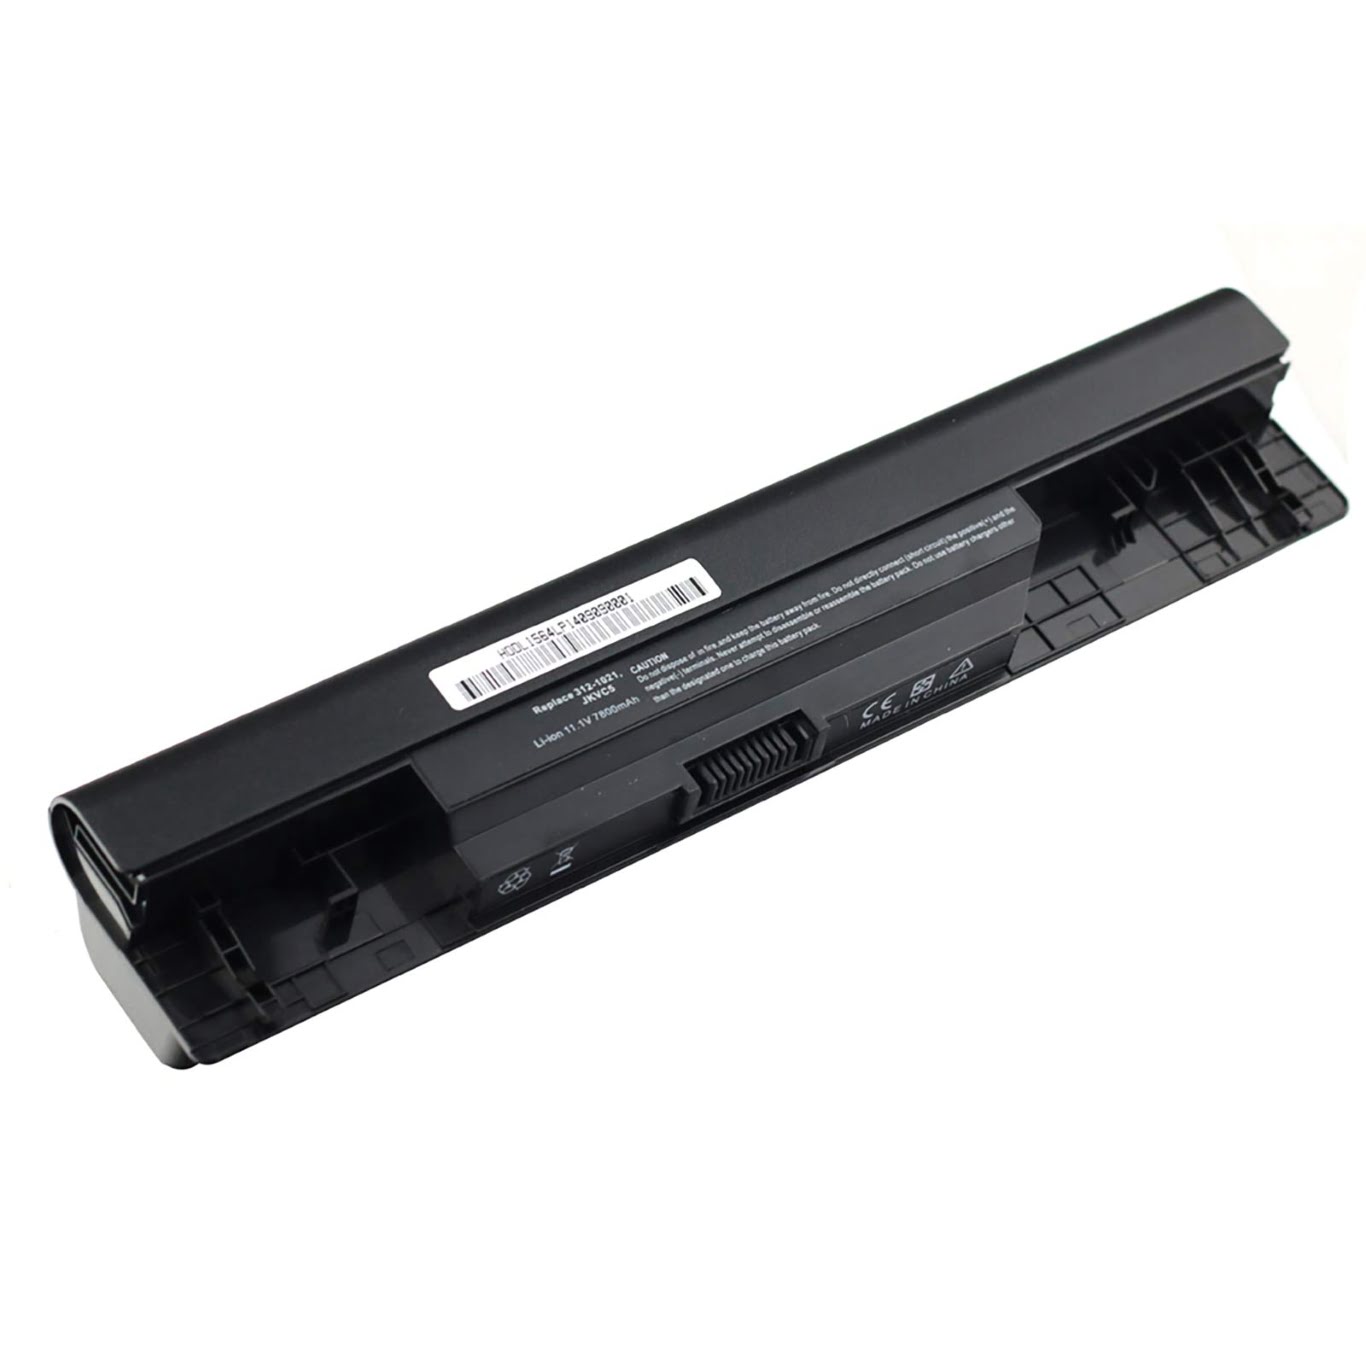 0FH4HR, 0NKDWV replacement Laptop Battery for Dell Inspiron 14, Inspiron 1464, 9 cells, 11.1V, 6600mAh